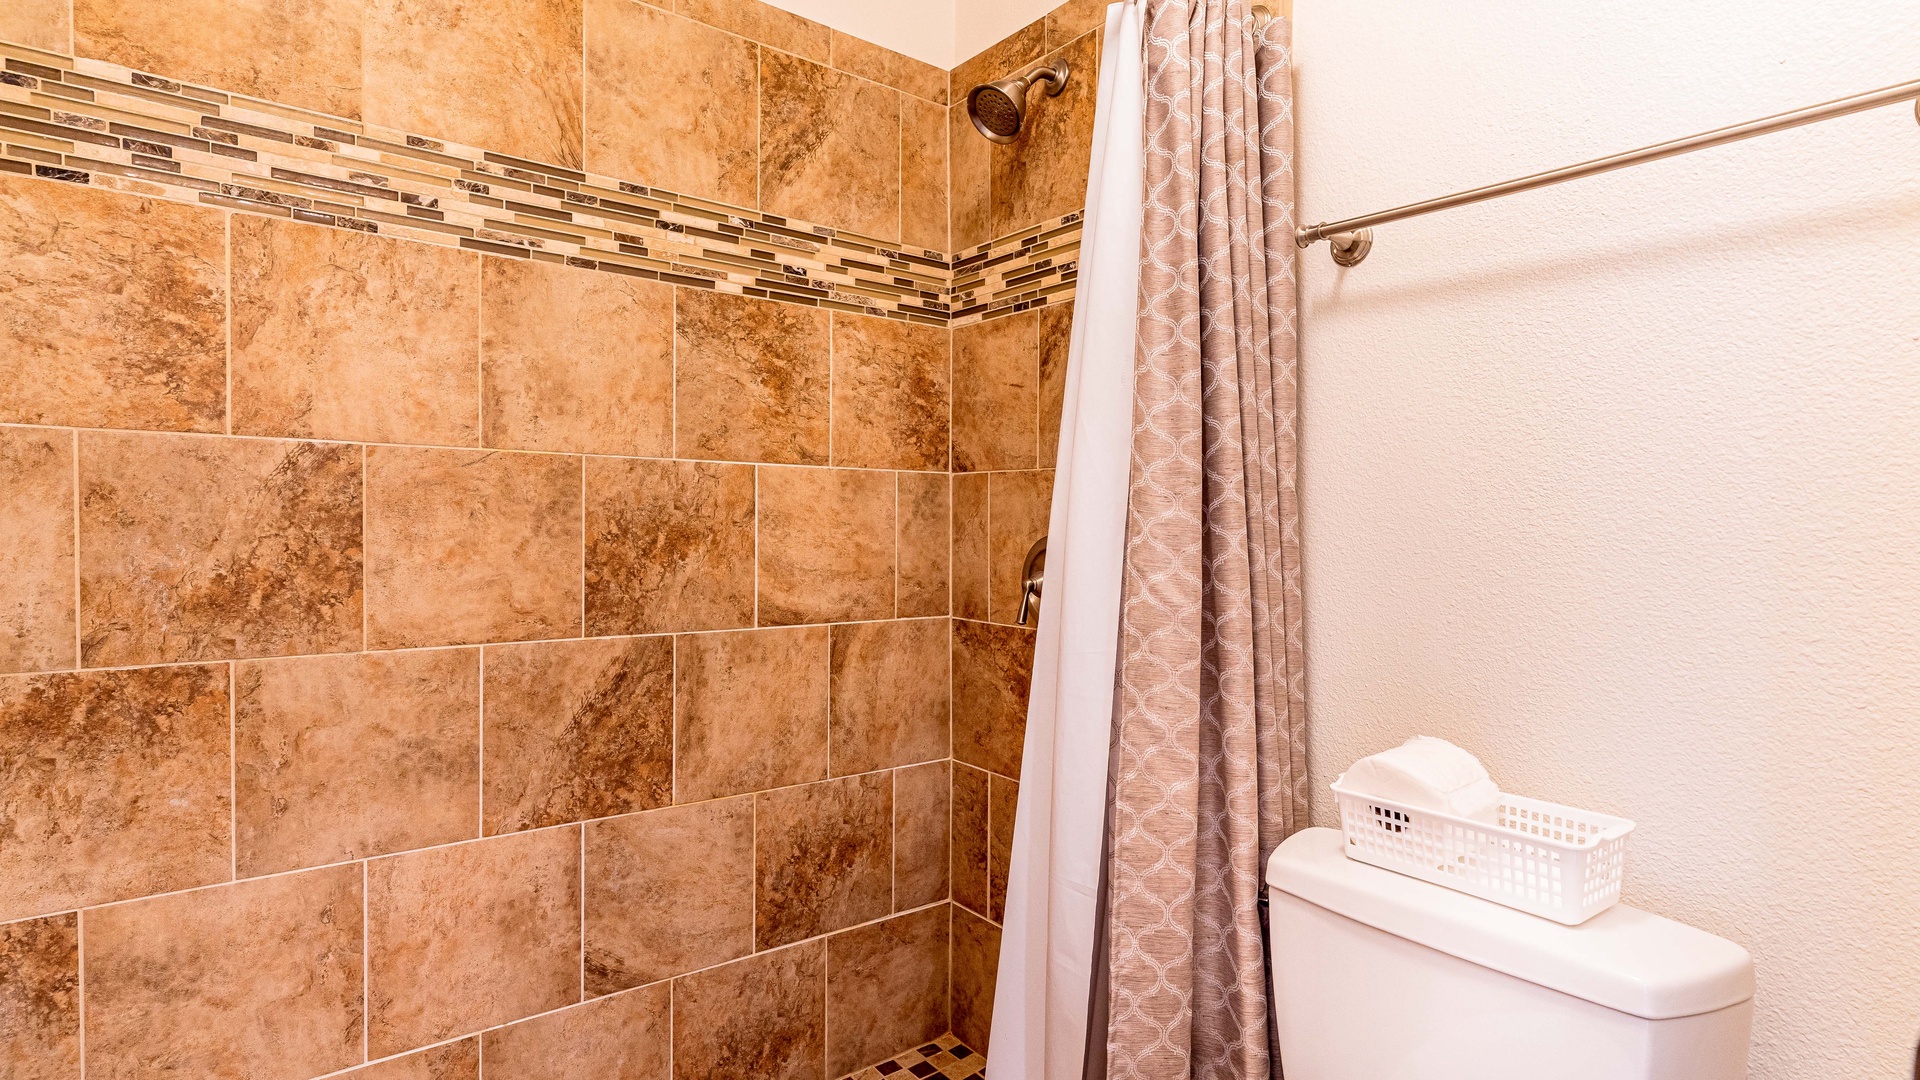 Kapolei Vacation Rentals, Fairways at Ko Olina 20G - Relax and unwind in this spacious primary guest bathroom.